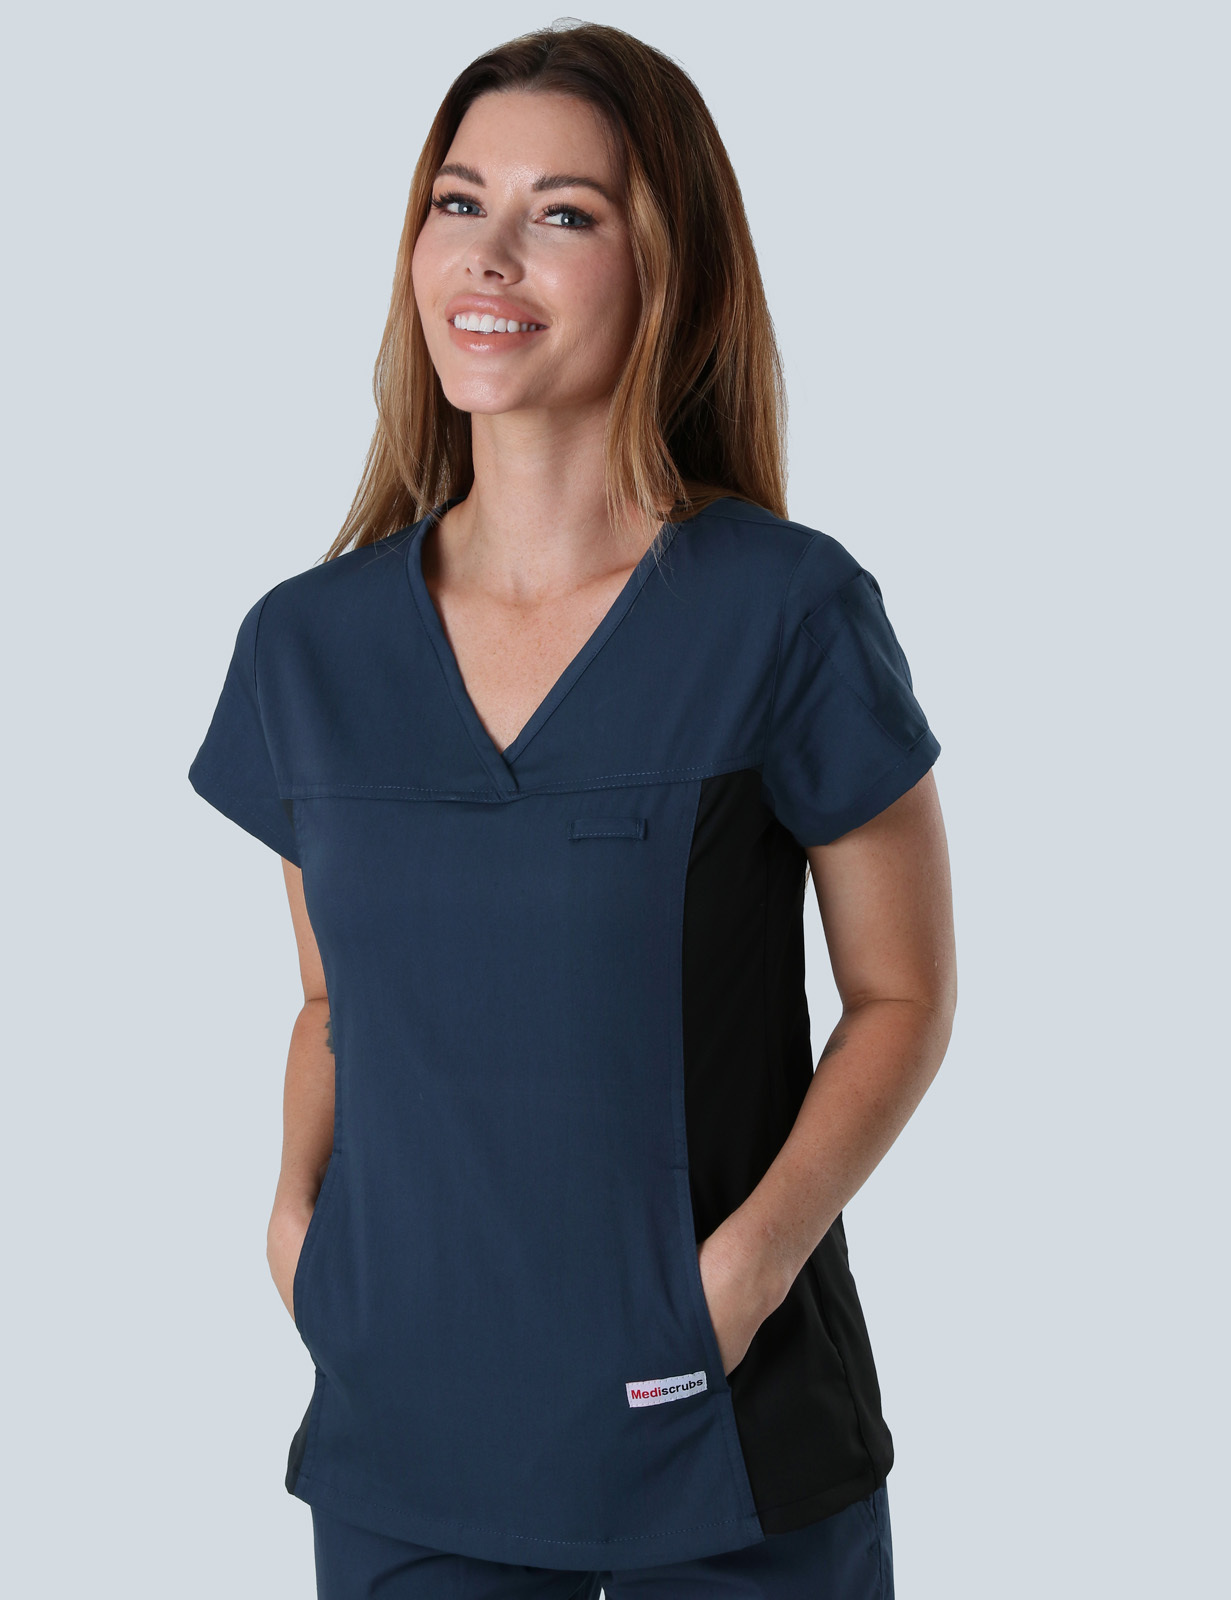 Weipa Hospital - ED CN (Women's Fit Spandex Scrub Top and Cargo Pants in Navy incl Logos)